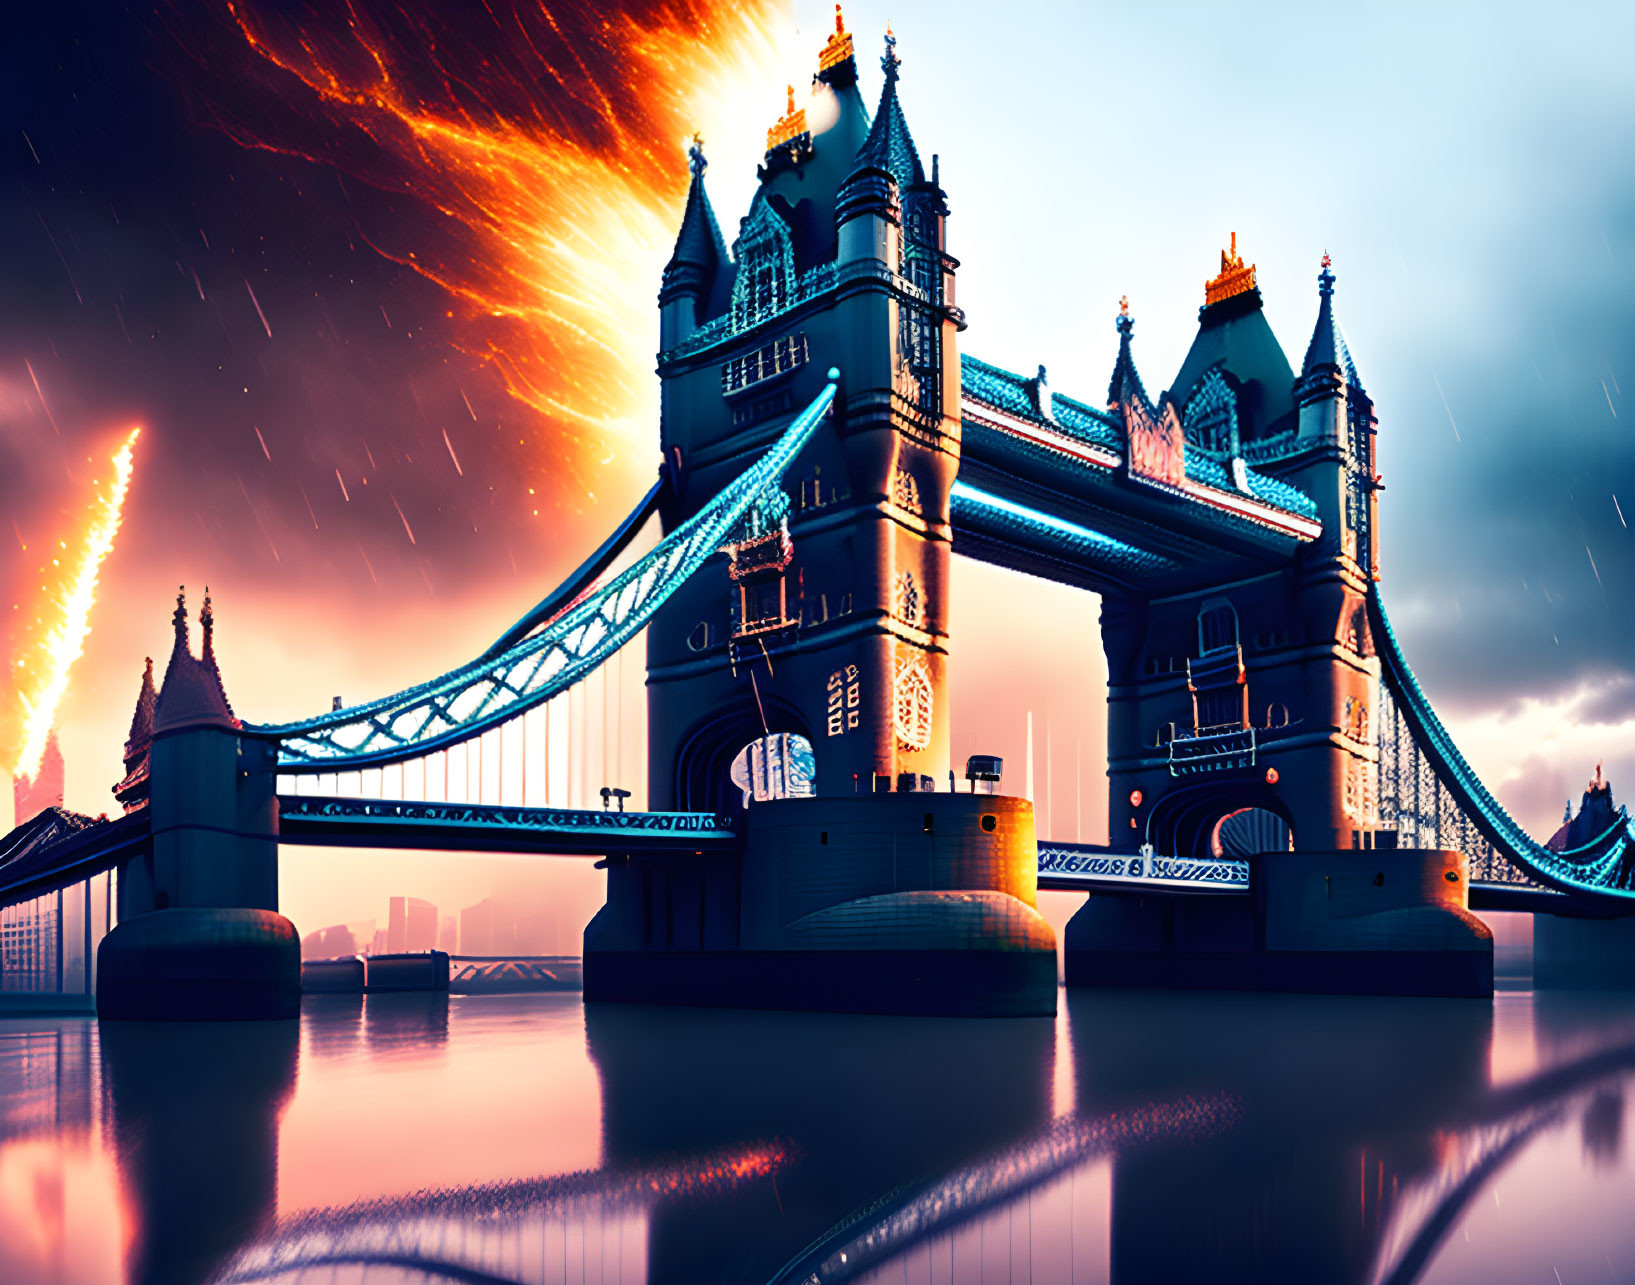 Fantastical London Tower Bridge with Orange and Teal Sky